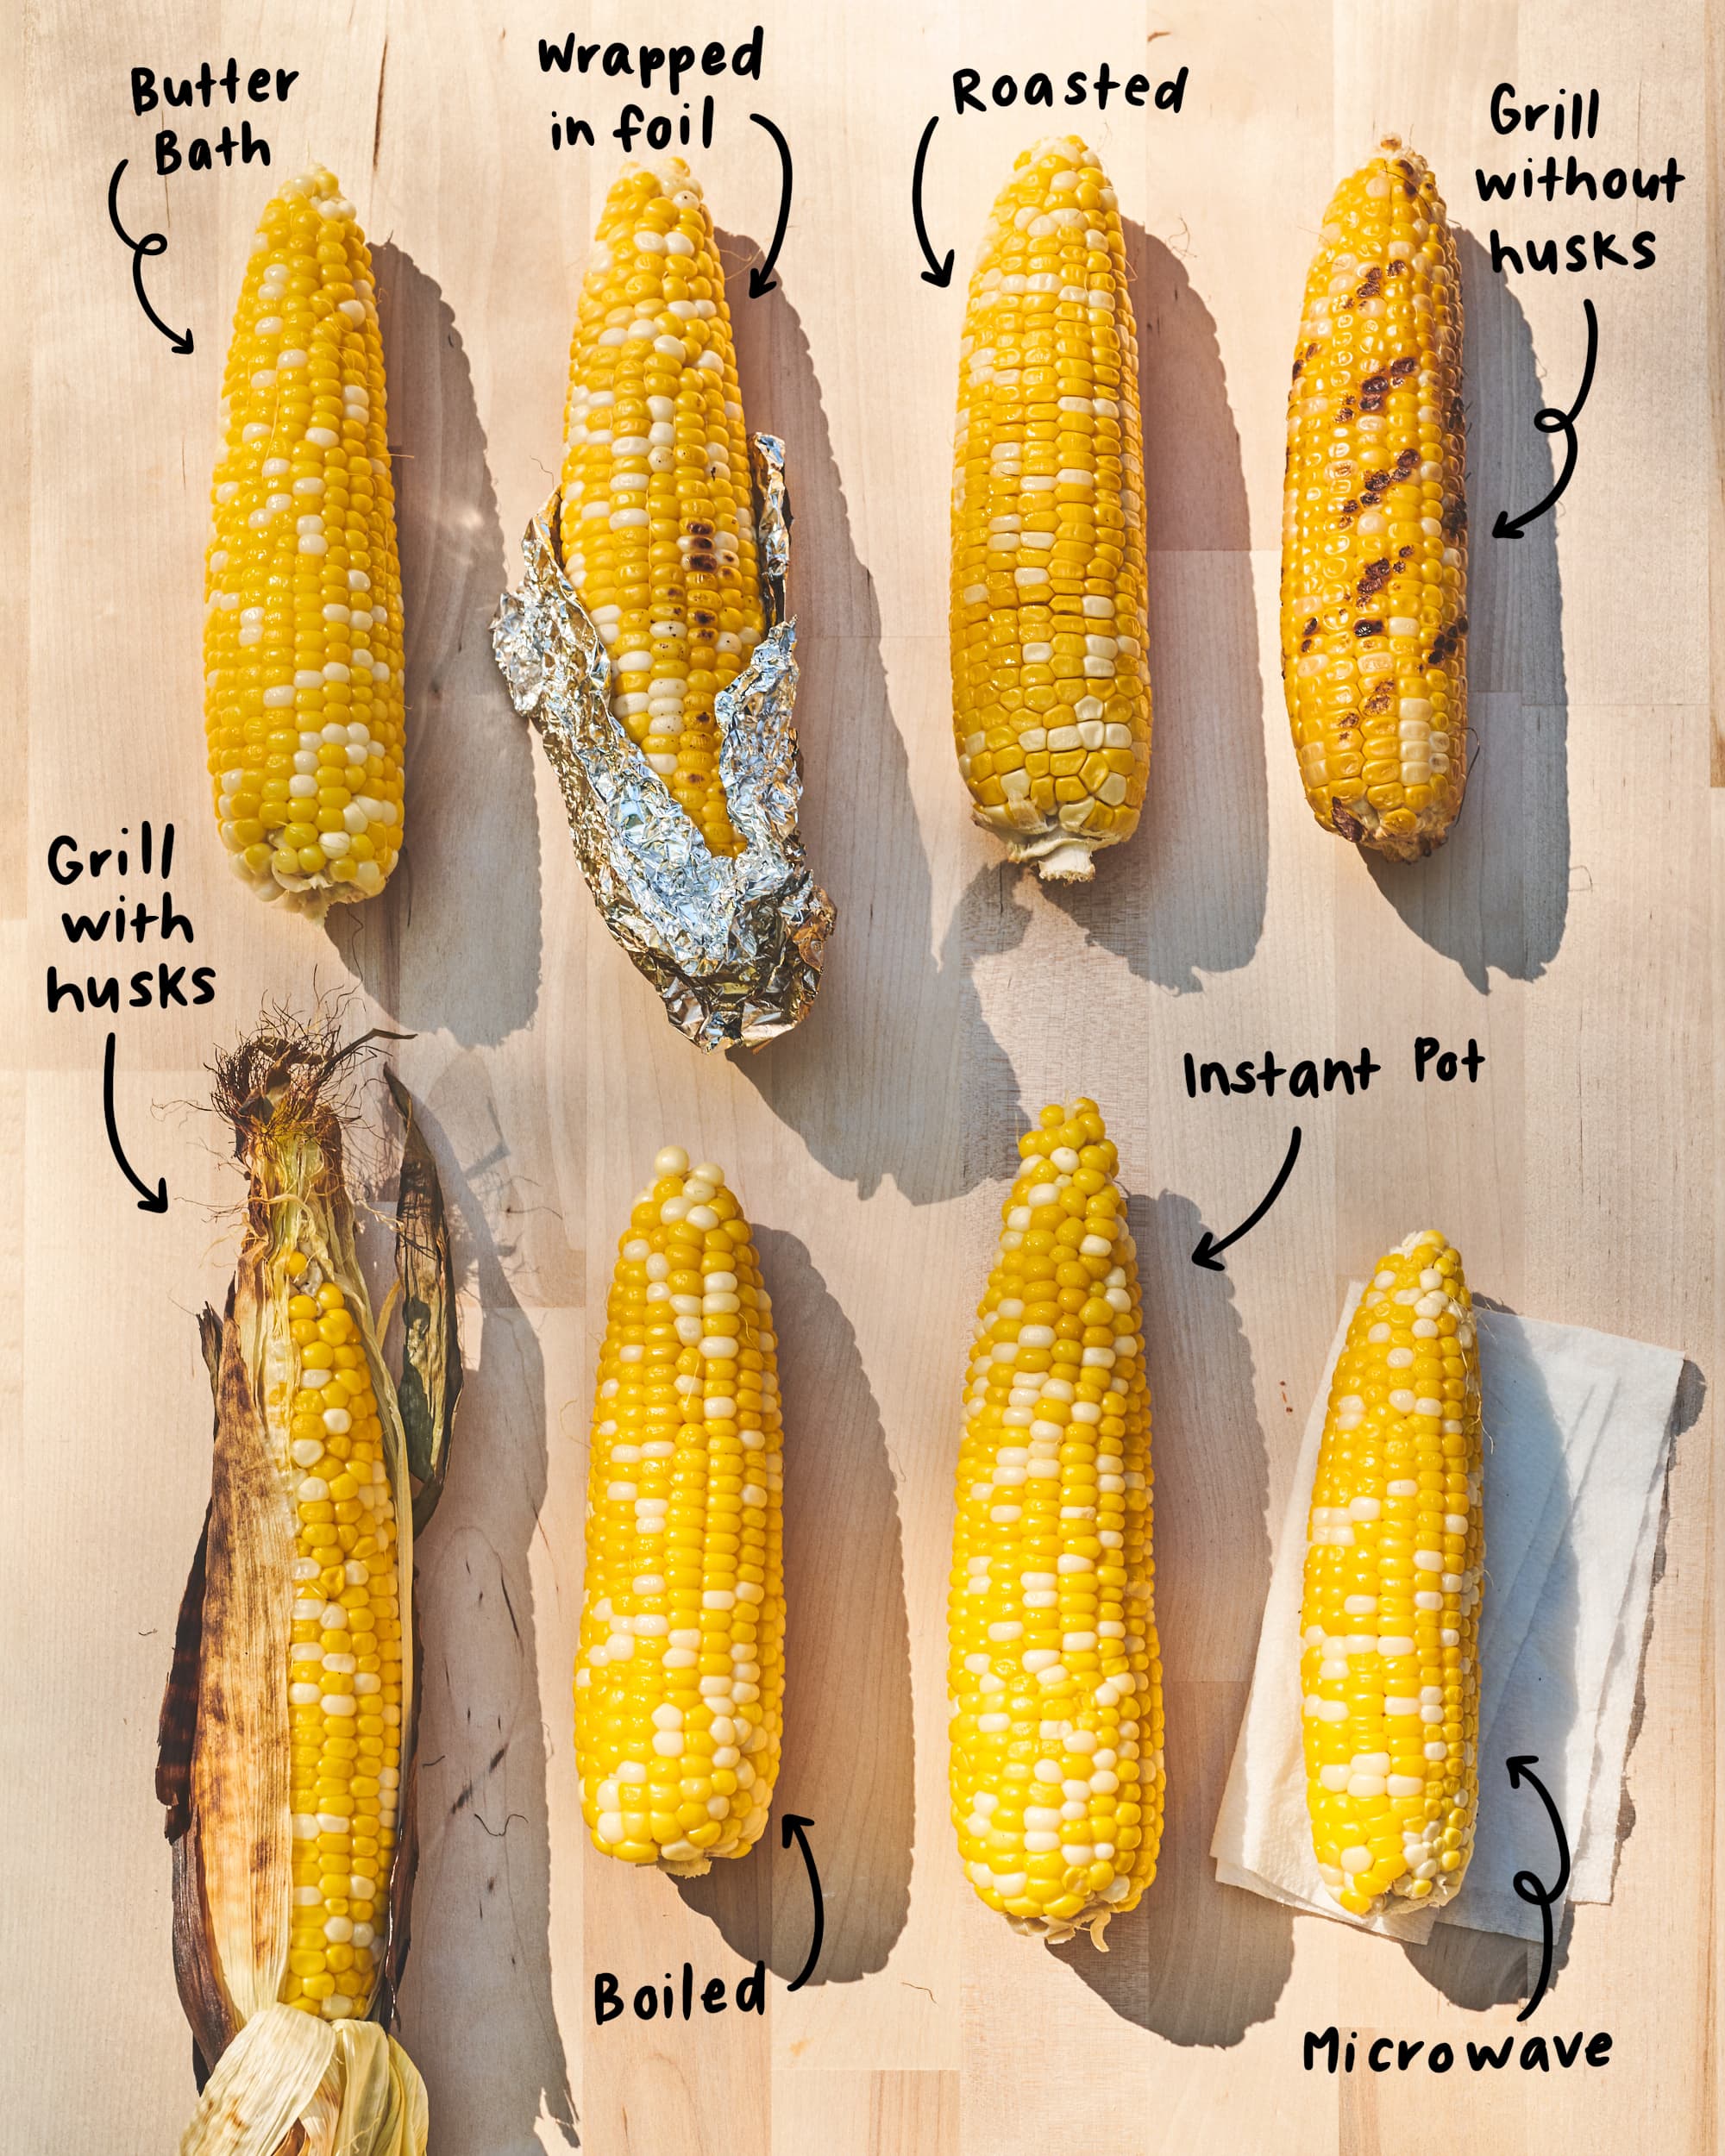 We Tried 8 Methods For Cooking Corn On The Cob And Found A Clear Winner Kitchn